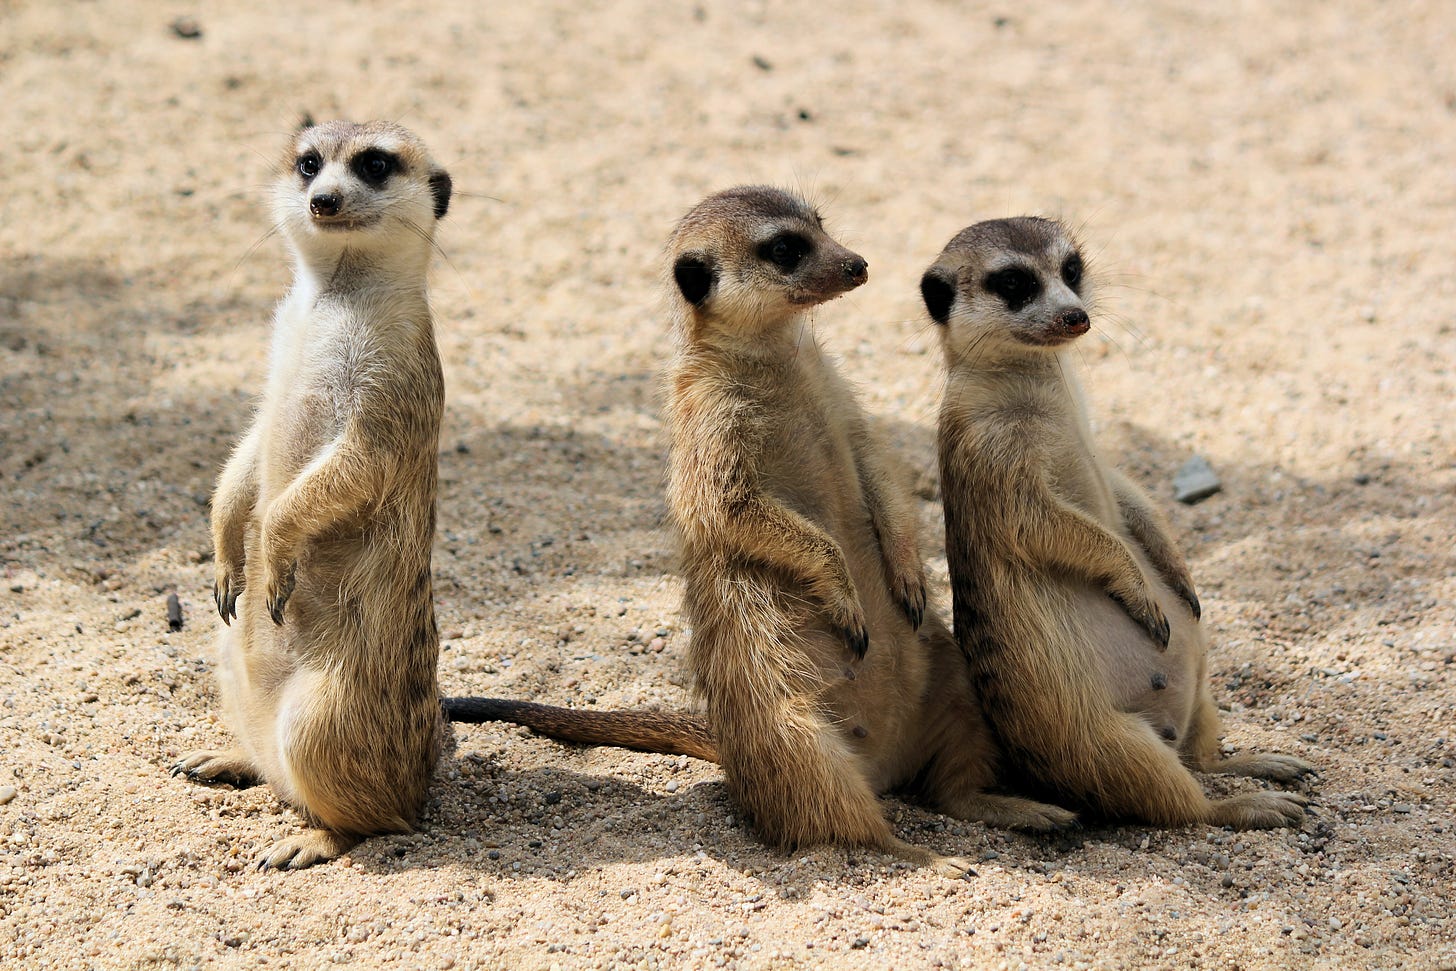 Three meerkats sitting upright and looking silly